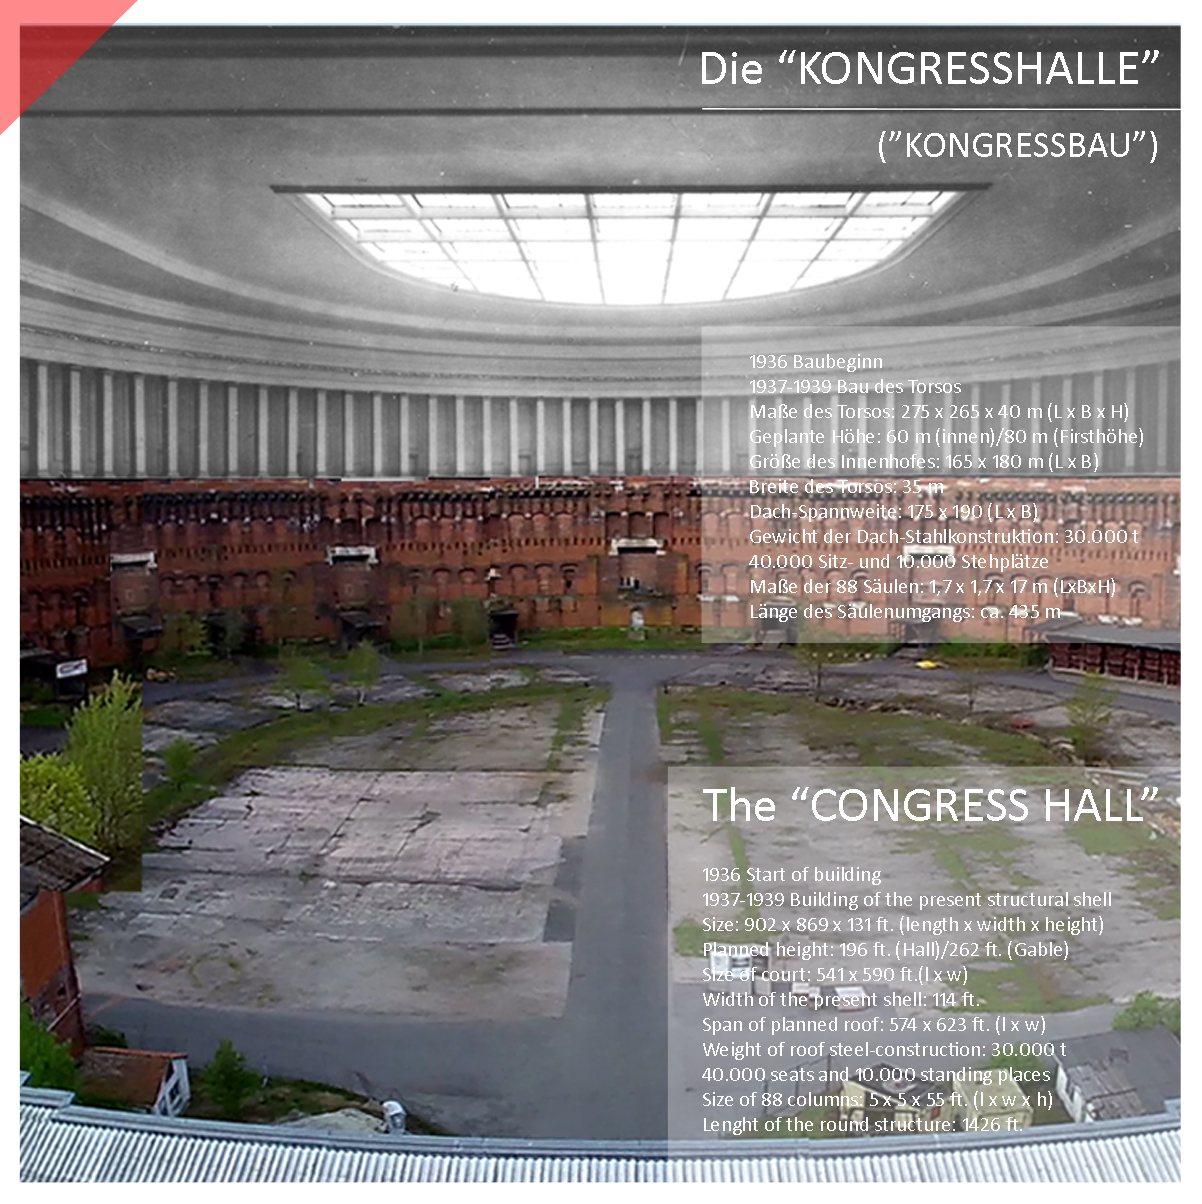 Nuremberg-Party-Rally-Grounds-new-Congress-hall-roof-66-columns-drone-flight-inner-court-Now-Then-panoramic-view-picture-postcard-folding-card